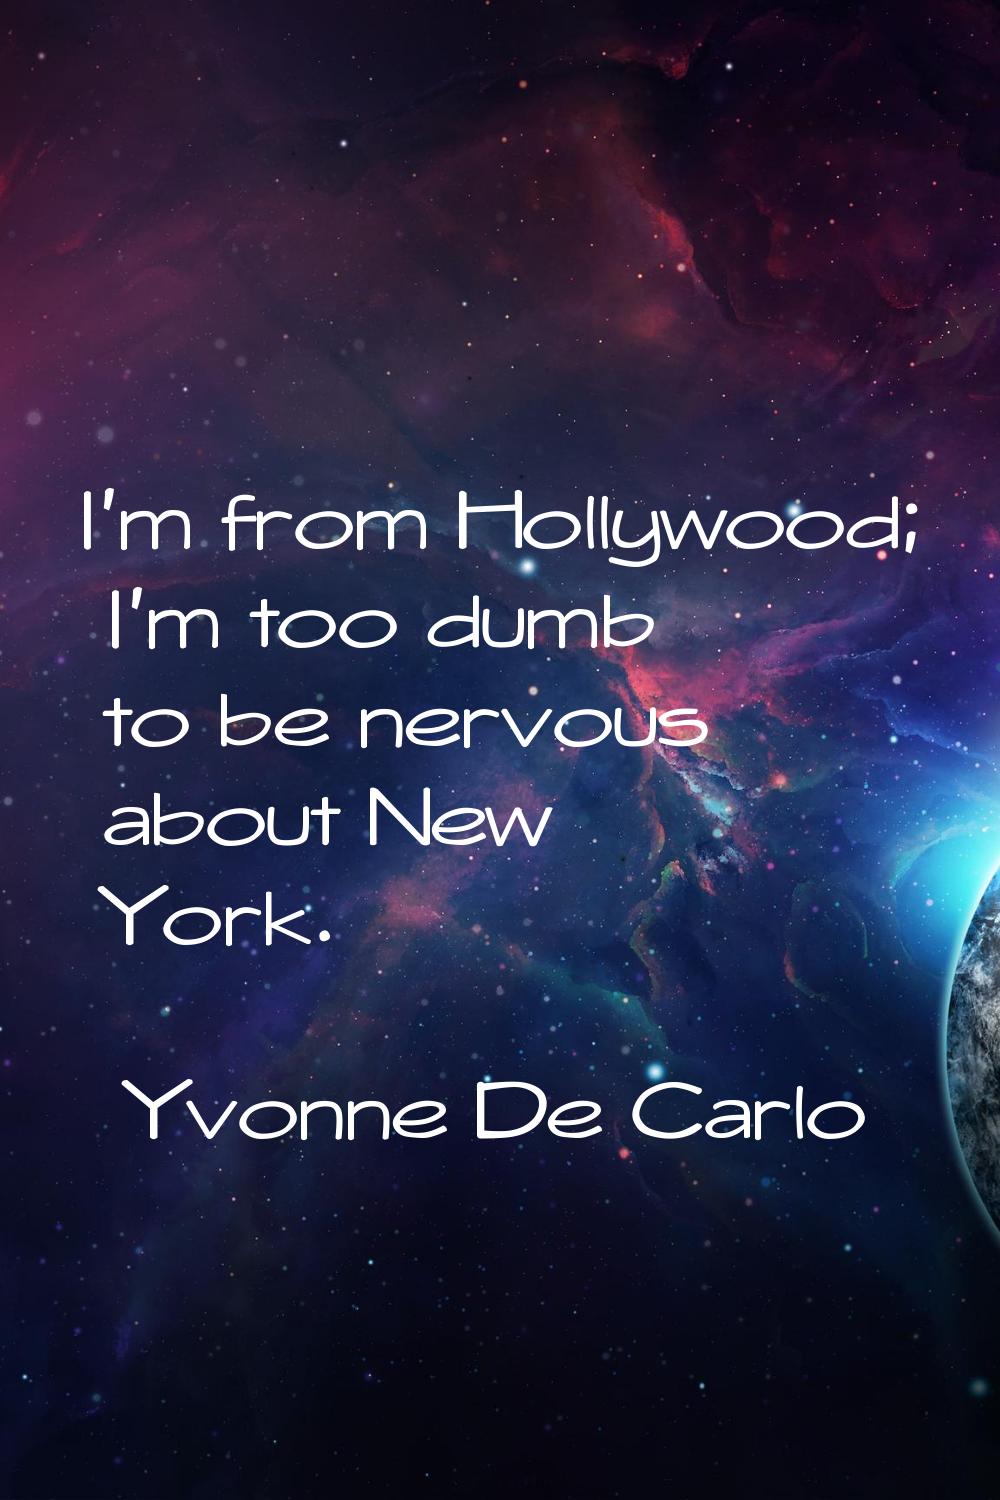 I'm from Hollywood; I'm too dumb to be nervous about New York.